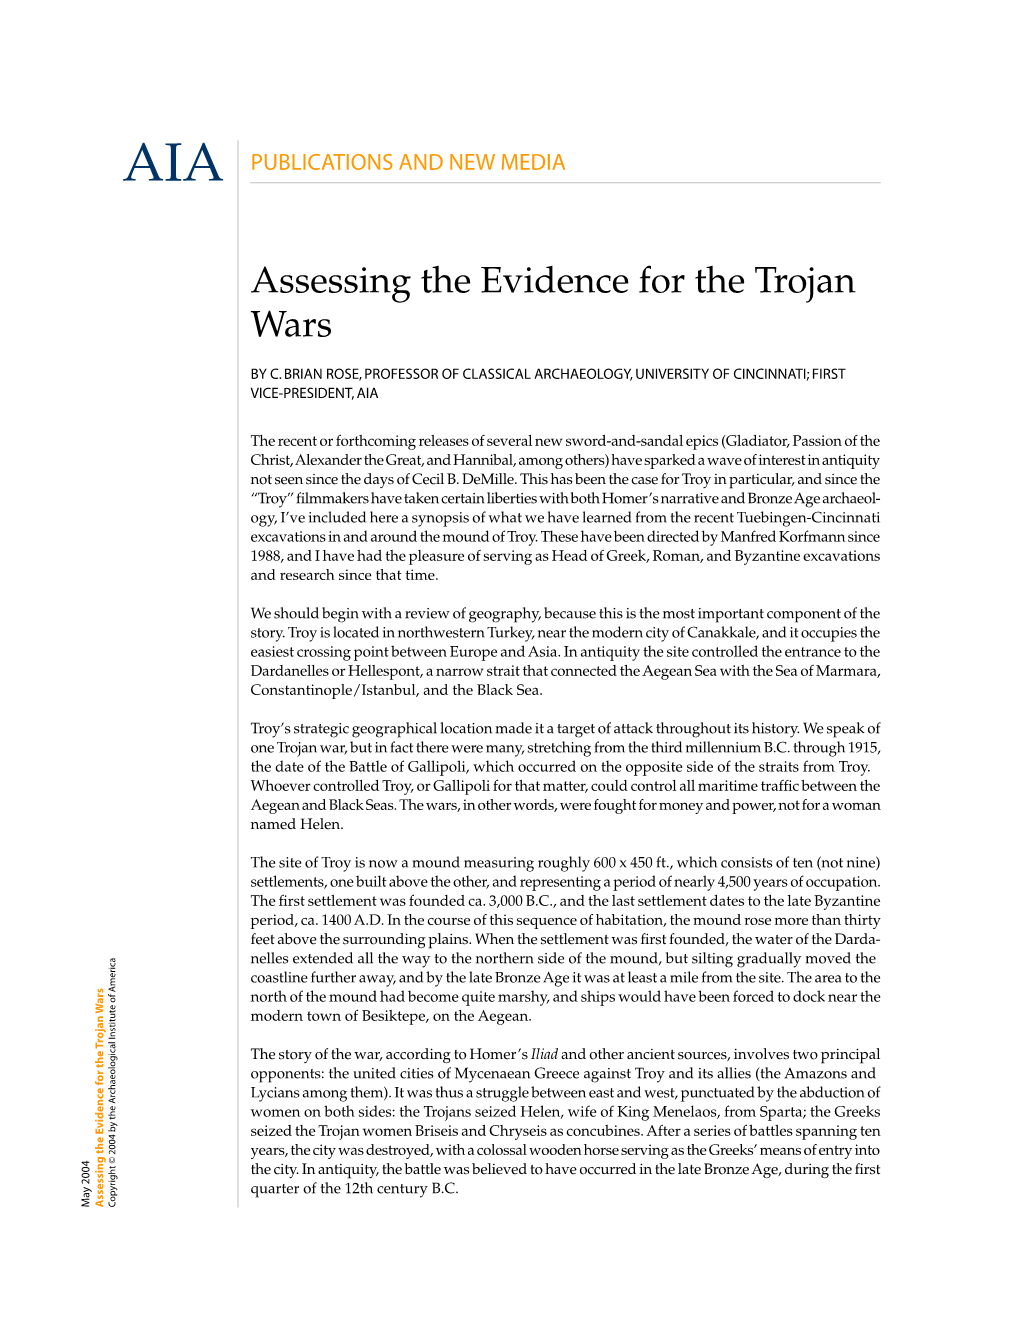 Assessing the Evidence for the Trojan Wars